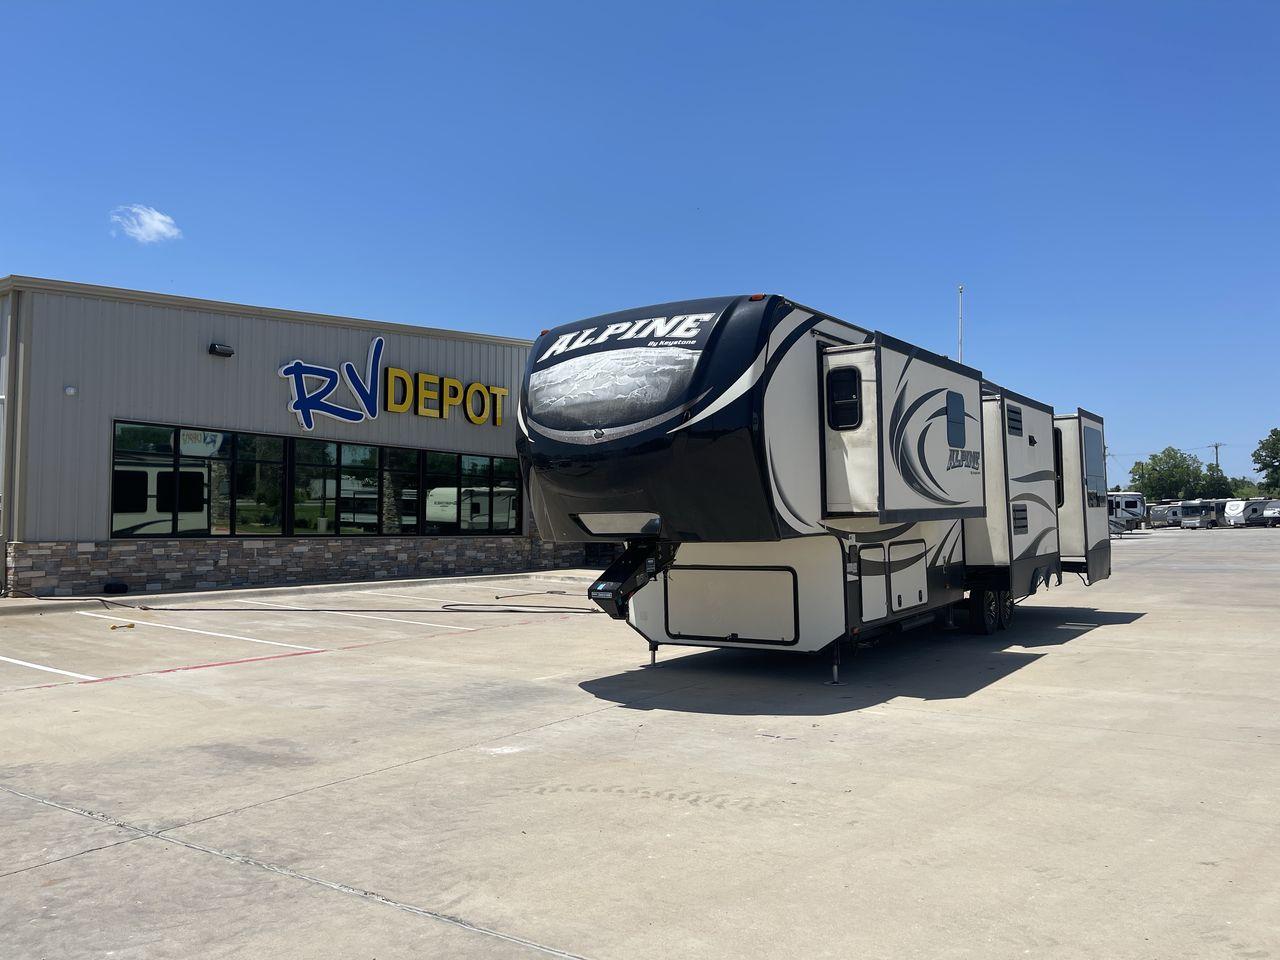 2015 WHITE KEYSTONE ALPINE 3535RE (4YDF35320FE) , Length: 39.08 ft. | Dry Weight: 12,416 lbs. | Gross Weight: 15,500 lbs. | Slides: 4 transmission, located at 4319 N Main Street, Cleburne, TX, 76033, (817) 221-0660, 32.435829, -97.384178 - Improve your RV experience with the 2015 Keystone Alpine 3535RE, a high-end fifth wheel that embodies ease and style. This model, which is an impressive 39.08 feet long, was carefully made for discerning travelers who want a perfect mix of style and usefulness. Because it is made of an aluminum body - Photo #0